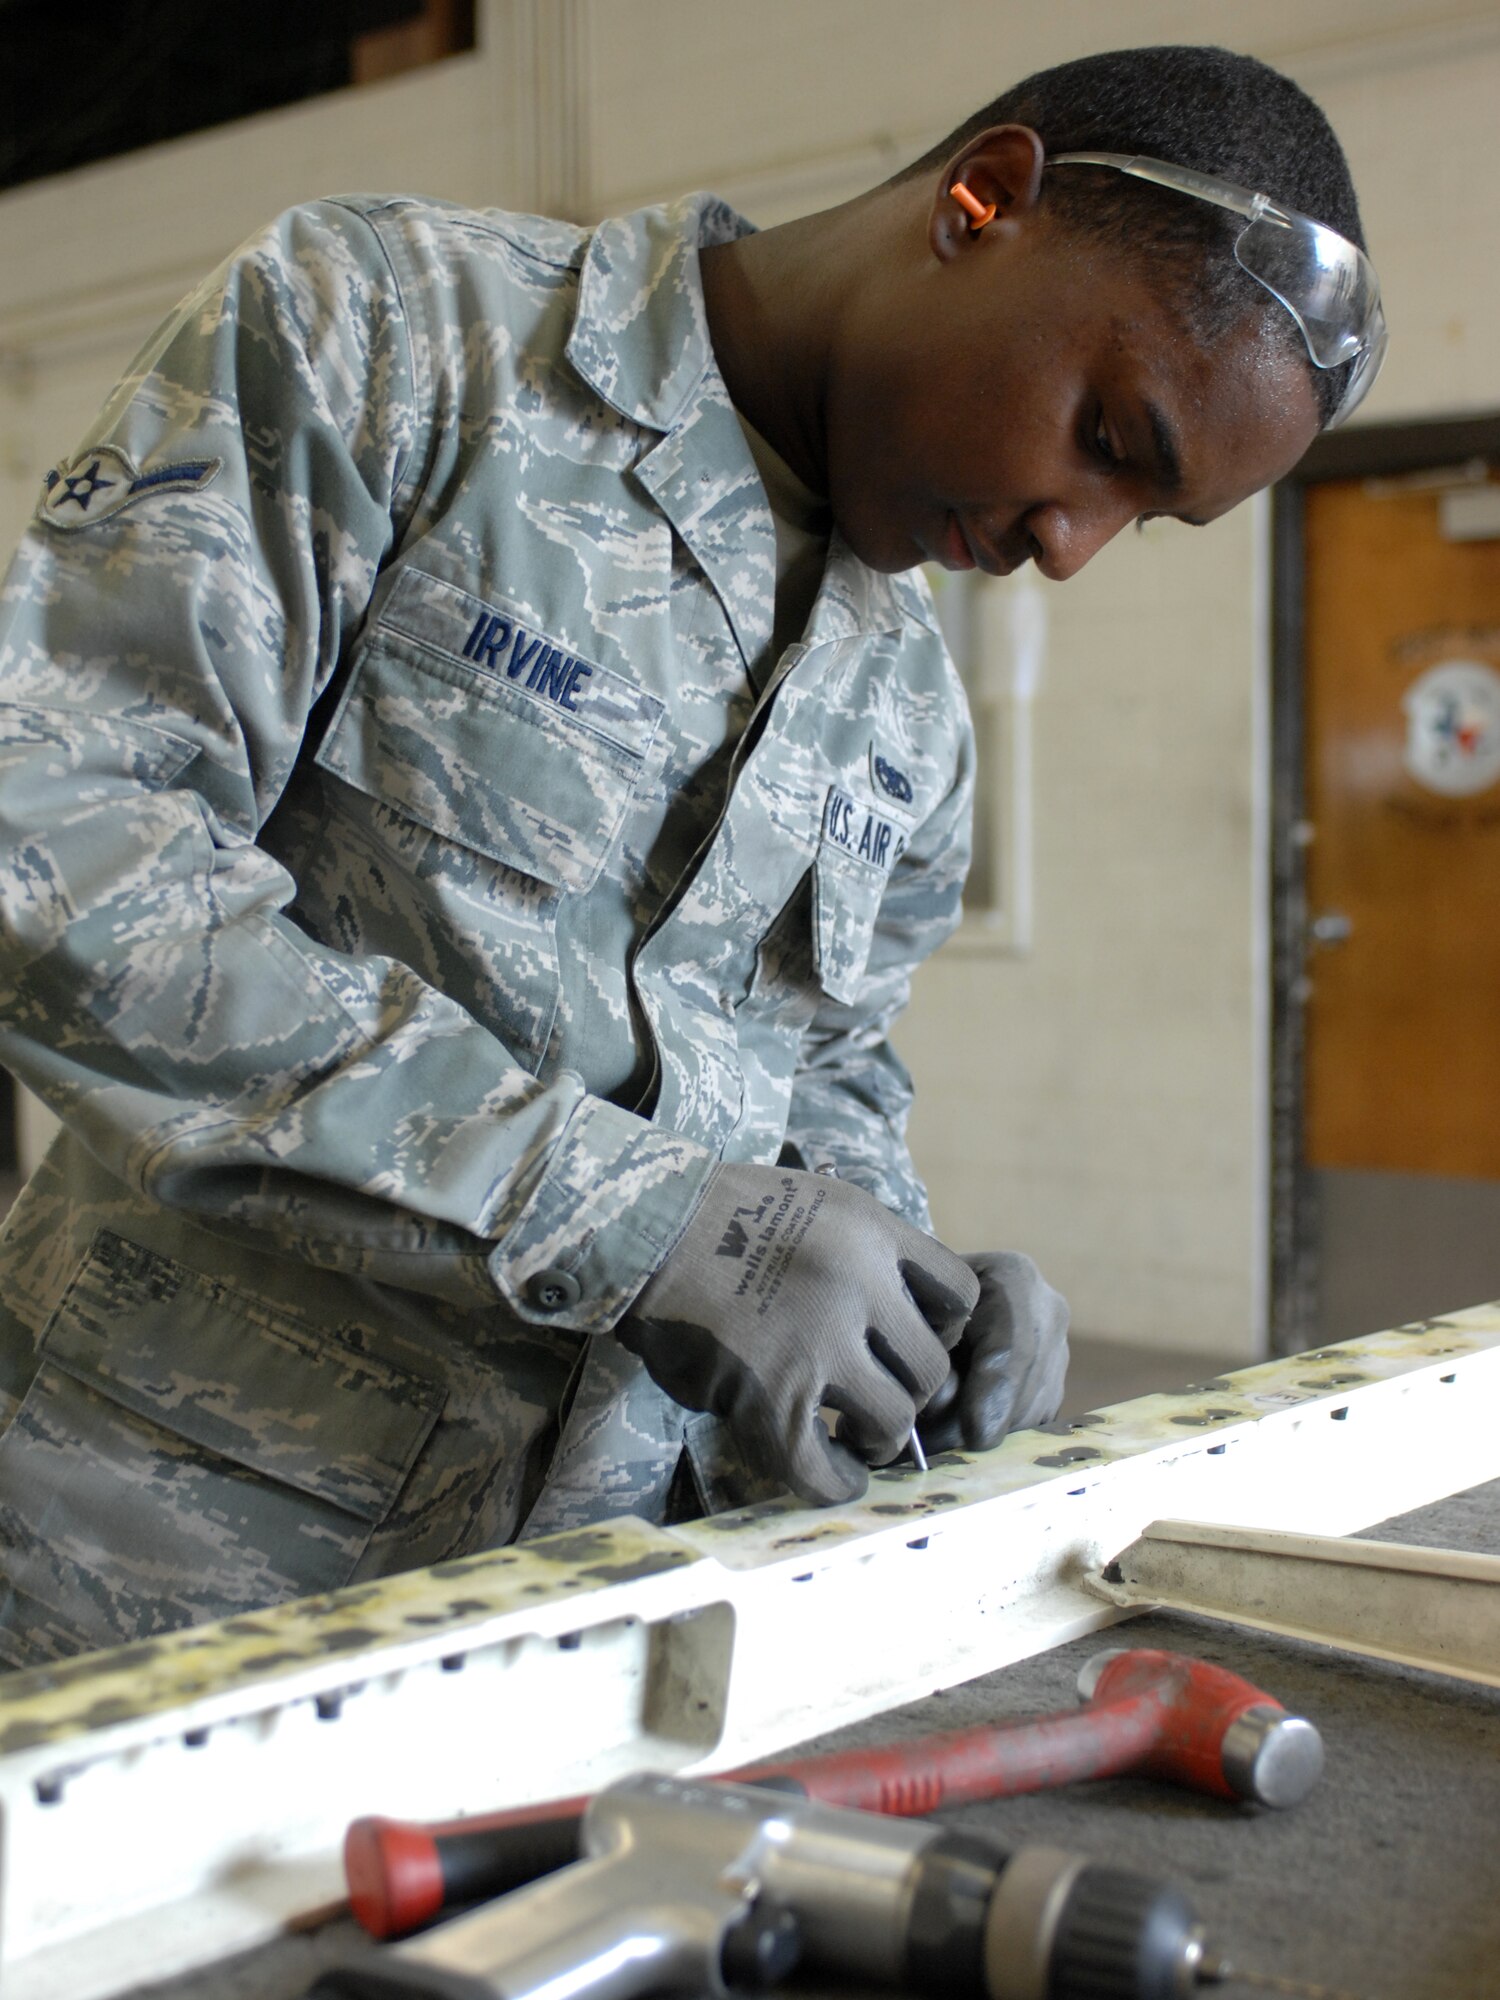 DYESS AIR FORCE BASE, Texas – Airman Craig Irvine, 7th Equipment Maintenance Squadron Aircraft Structural Maintenance Apprentice, removes and replaces pull-through rivets on a lower spring panel for a B-1 Bomber June 30 at the aircraft structural maintenance shop here.  Maintainers repair aircraft in preparation for deployments and training in support of Overseas Contingency Operations.  (U.S. Air Force photo/Senior Airman Jenifer H. Calhoun)